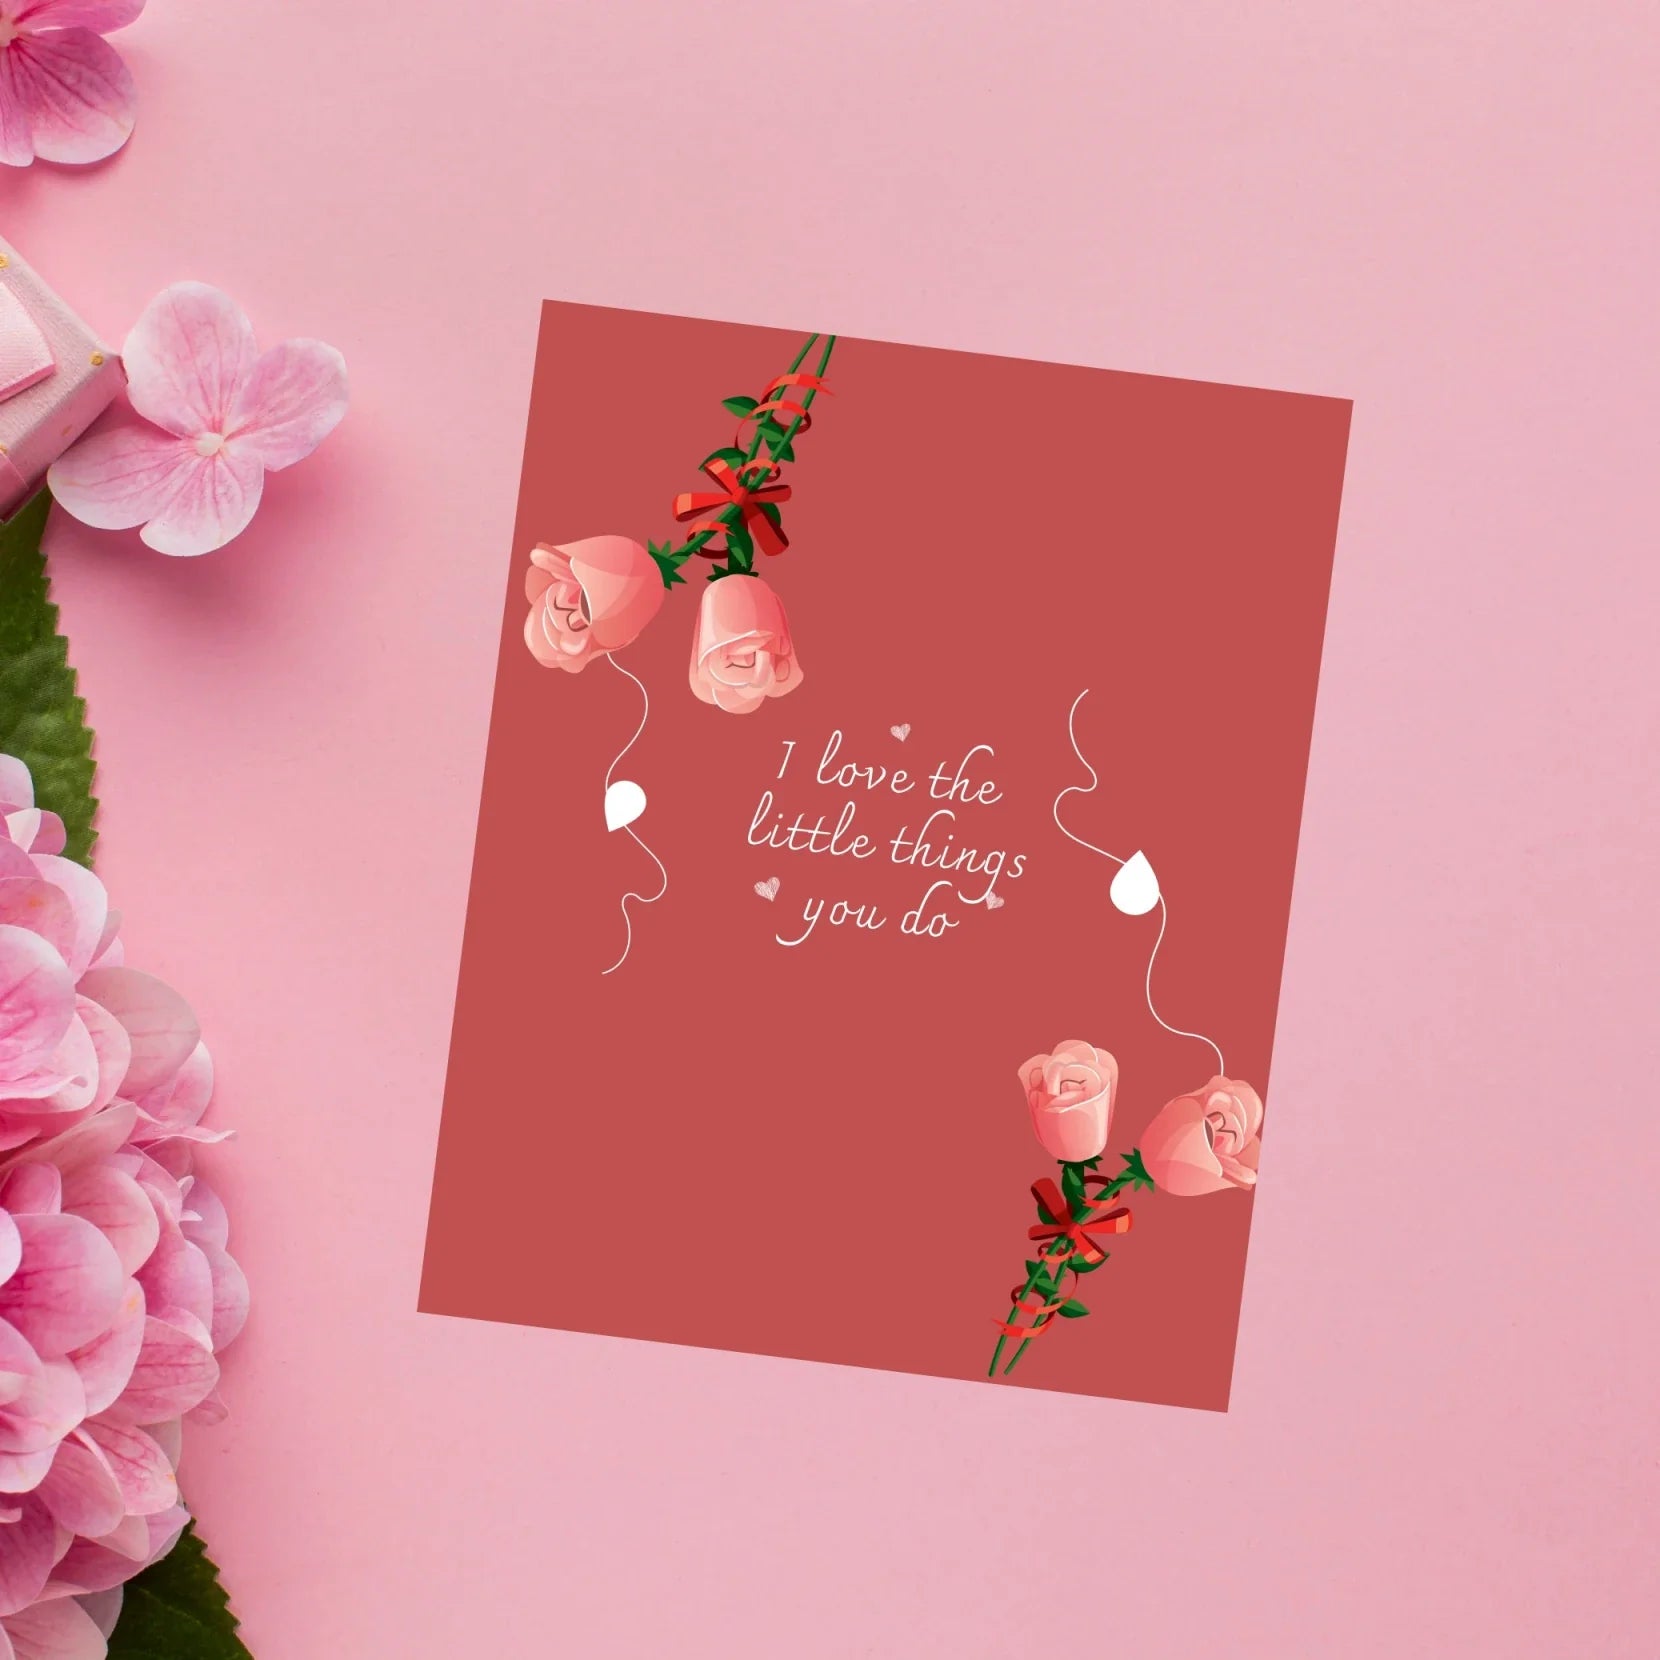 Share your feelings for your special someone from the core of your heart with a romantic postcard